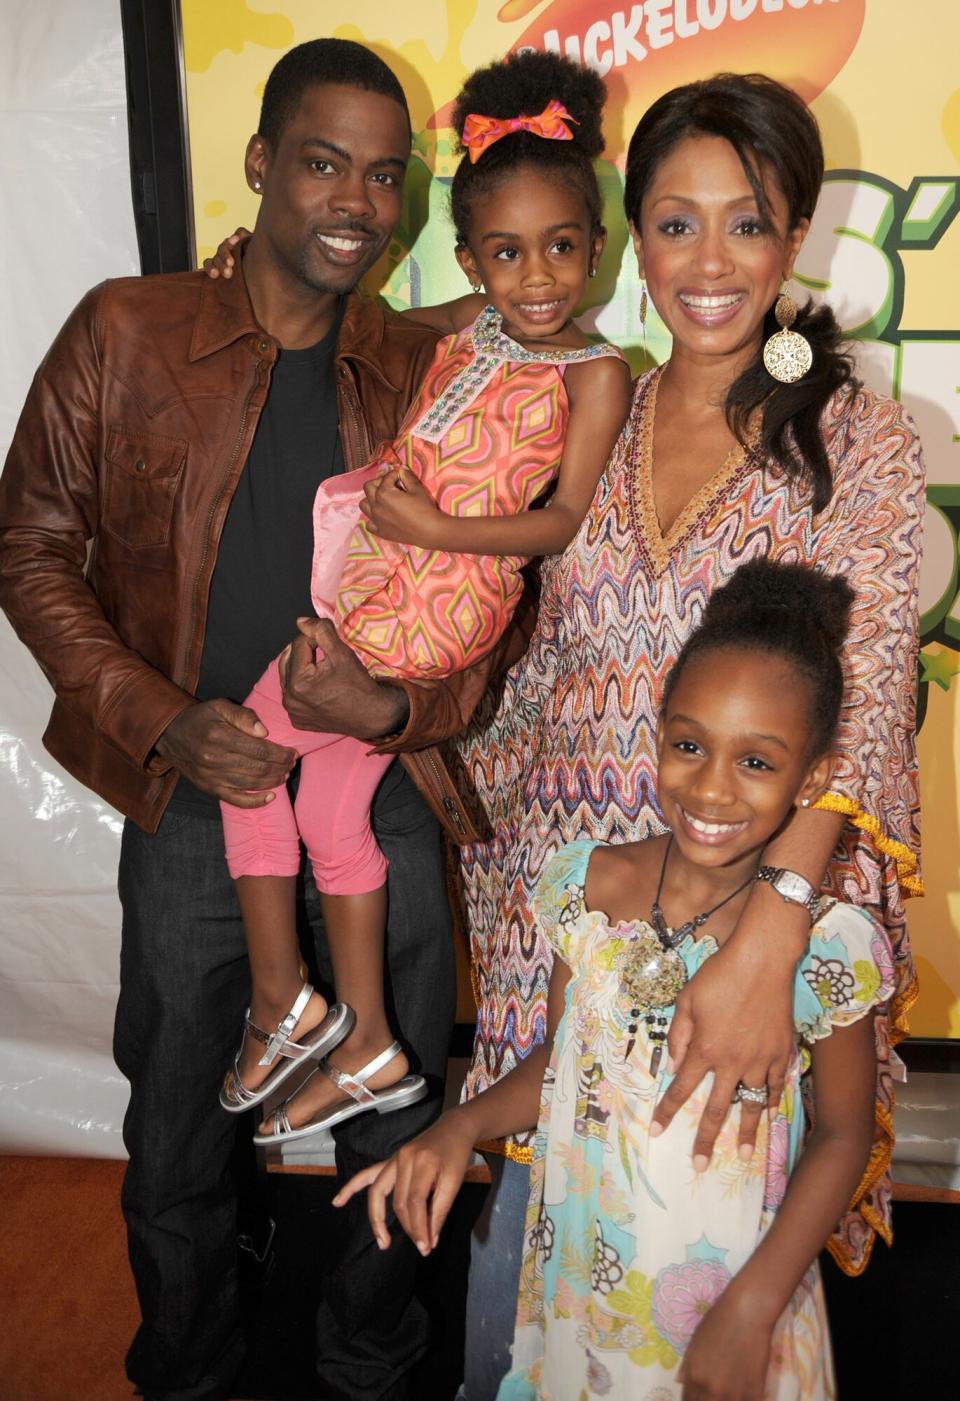 Chris Rock (L), wife Malaak Compton and daughters Lola and Zahara arrive at Nickelodeon's 2009 Kids' Choice Awards at UCLA's Pauley Pavilion on March 28, 2009 in Westwood, California